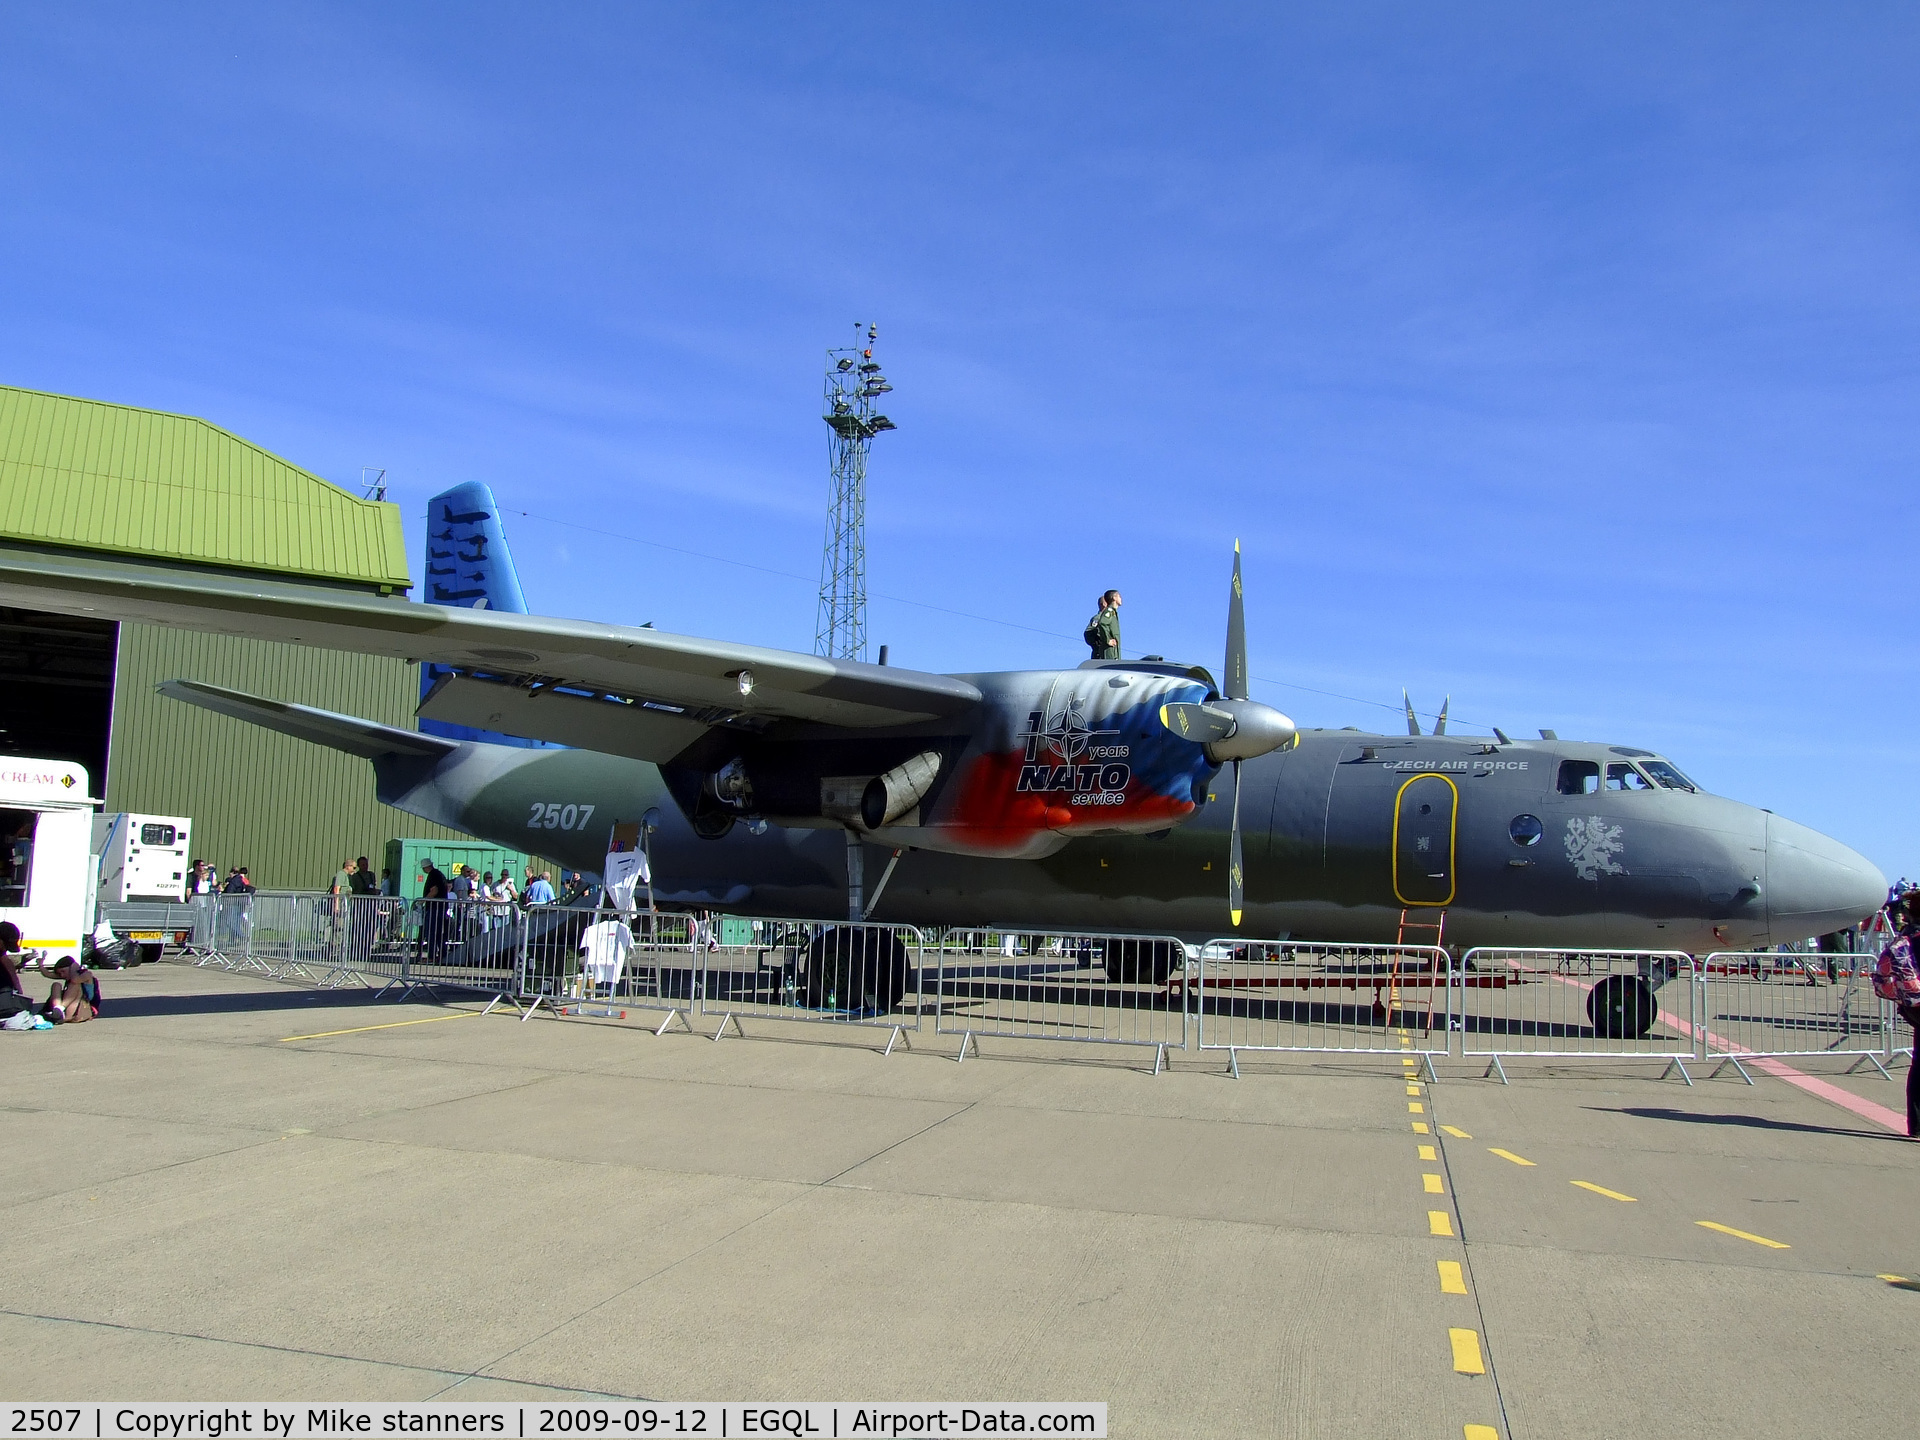 2507, Antonov An-26 C/N 12507, AN-26 Curl from 241dsl,note the 10 years of NATO Service, art work on engine cowling